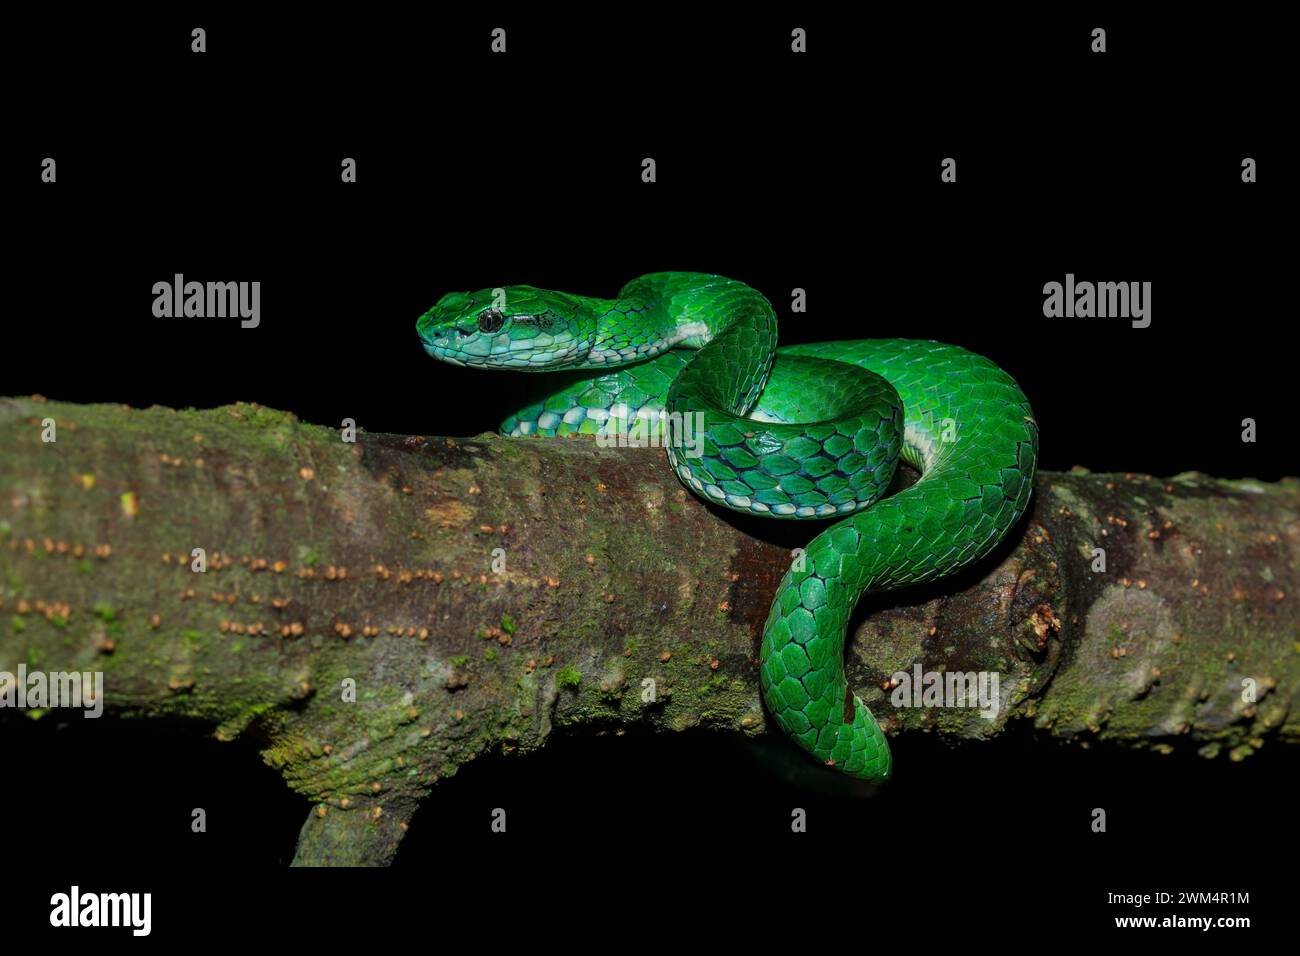 Malabar pit viper green / Pportrait of large-scaled pit viper from Munnar, Kerala. Craspedocephalus macrolepis. Stock Photo